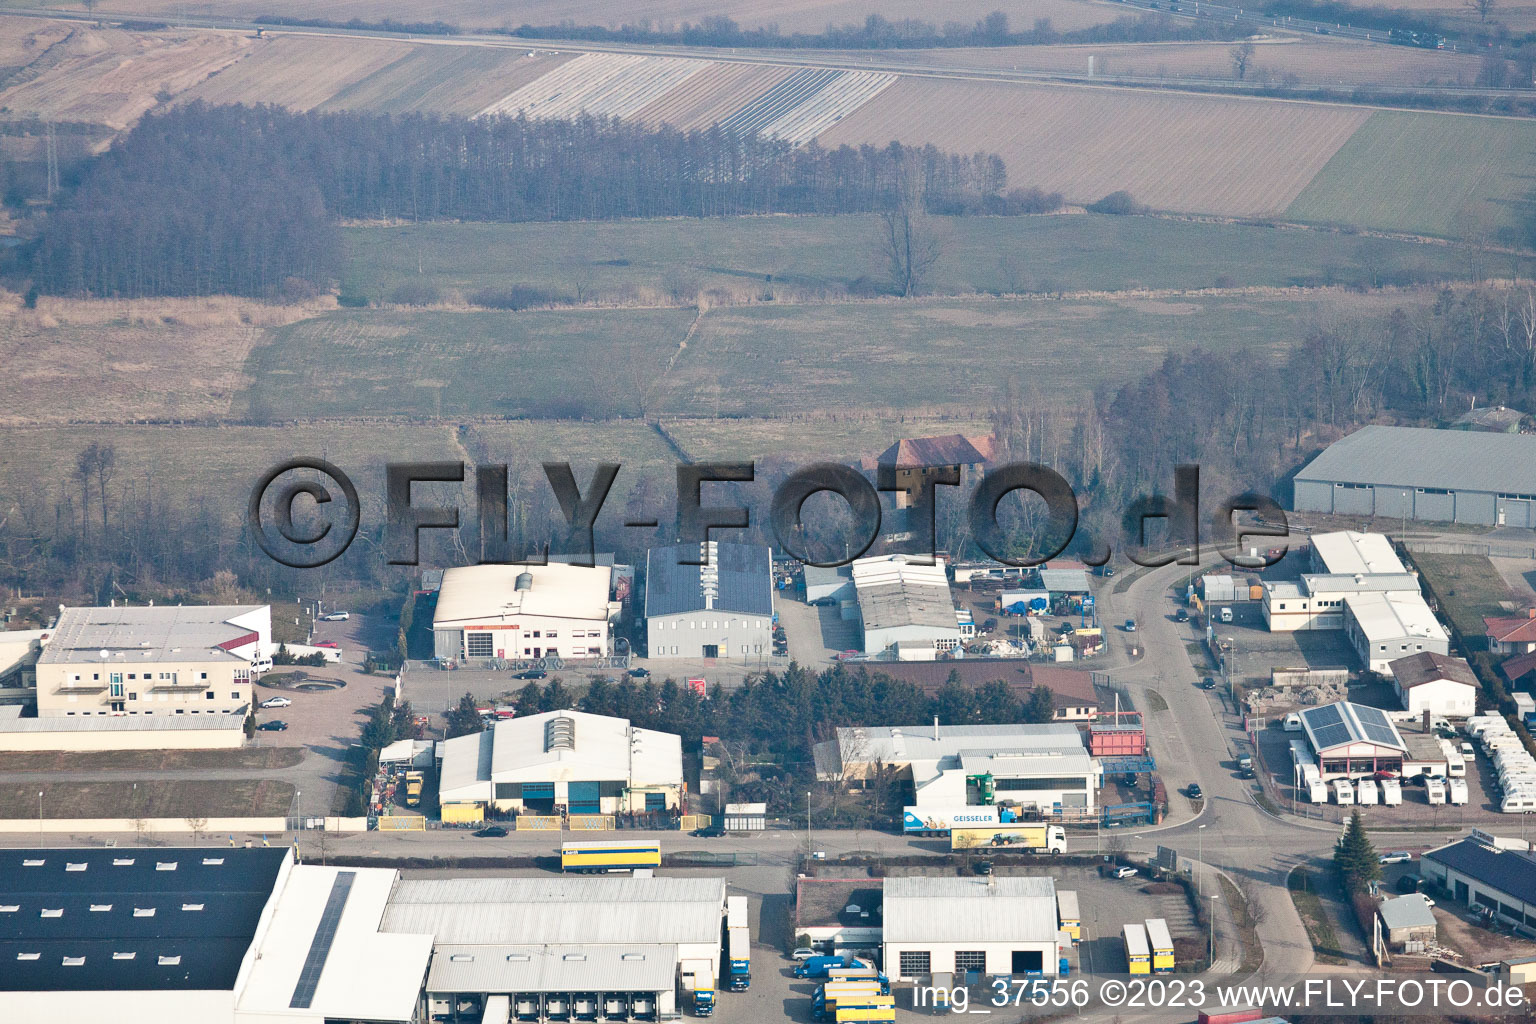 Horst industrial area in the district Minderslachen in Kandel in the state Rhineland-Palatinate, Germany seen from a drone